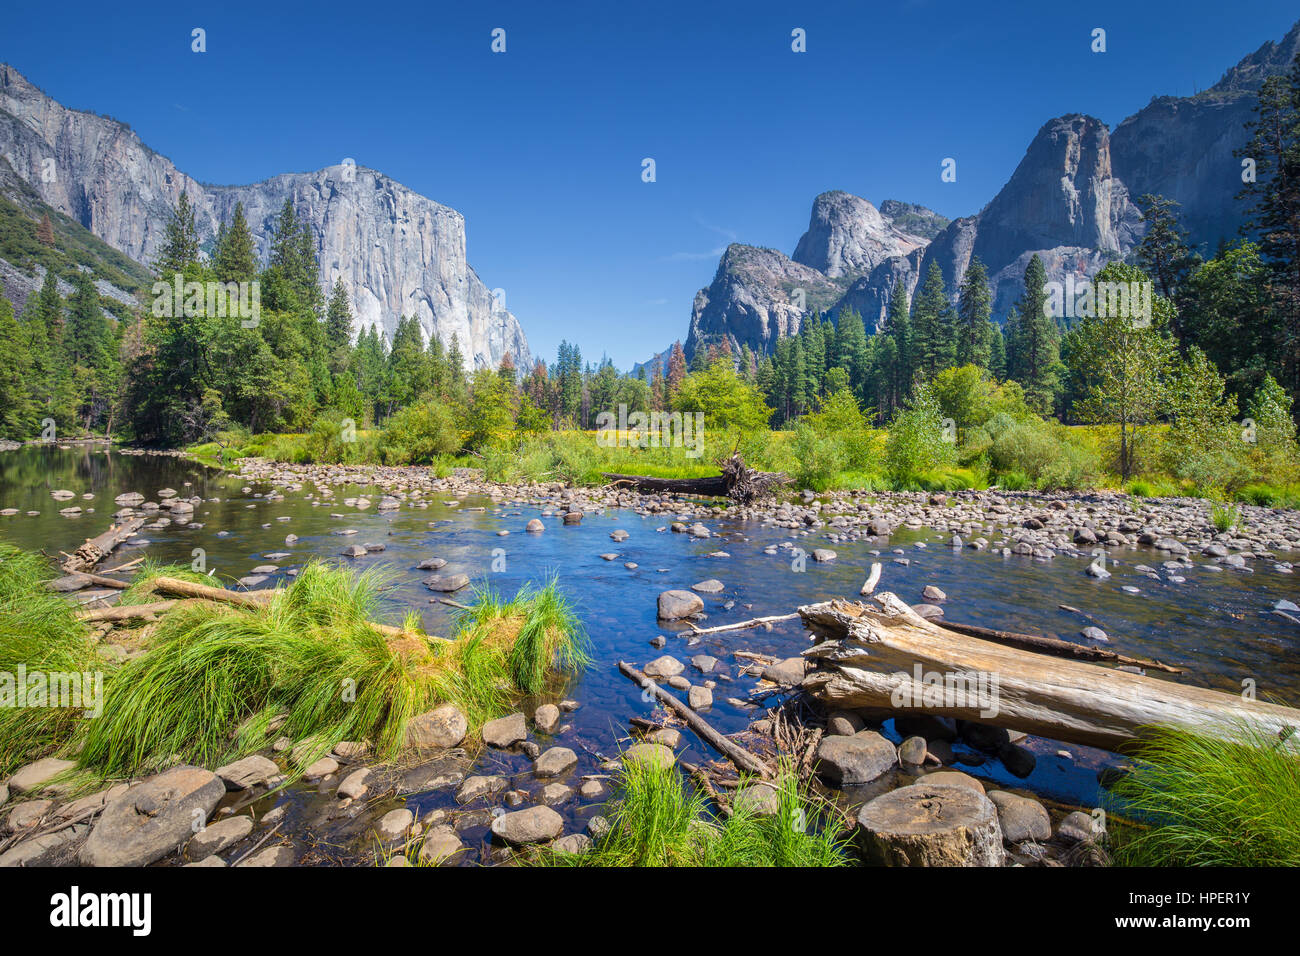 Classic view of scenic Yosemite Valley with famous El Capitan rock climbing summit and idyllic Merced river on a sunny day with blue sky and clouds in Stock Photo